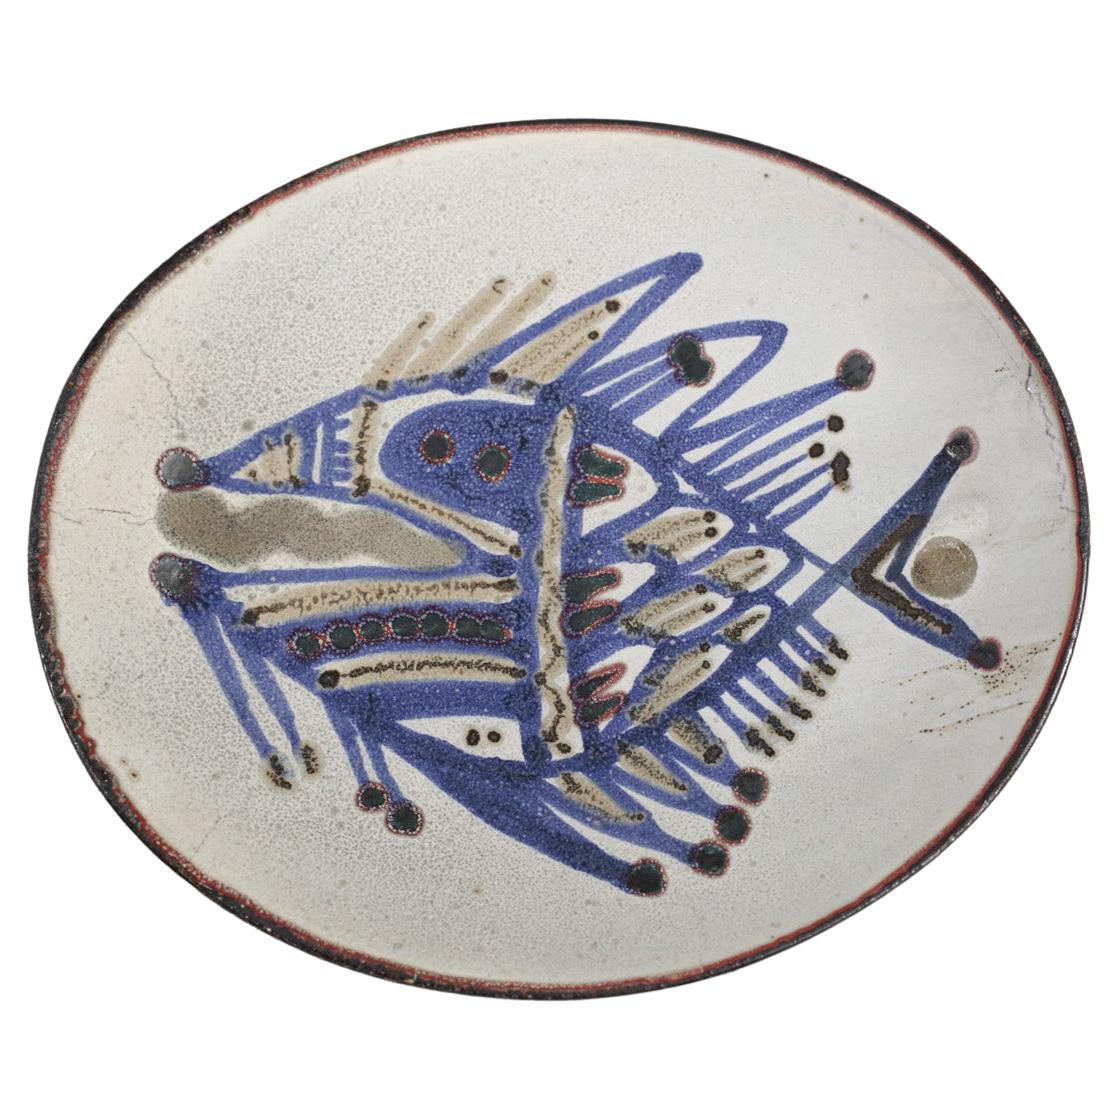 Lot of 5 plates of the 60's by the French ceramist Jean Derval for the Atelier du Portail in Vallauris. Ceramic plates with each of them a unique design representing a fish. Signature of that 'sad on the back. Very nice vintage condition of the